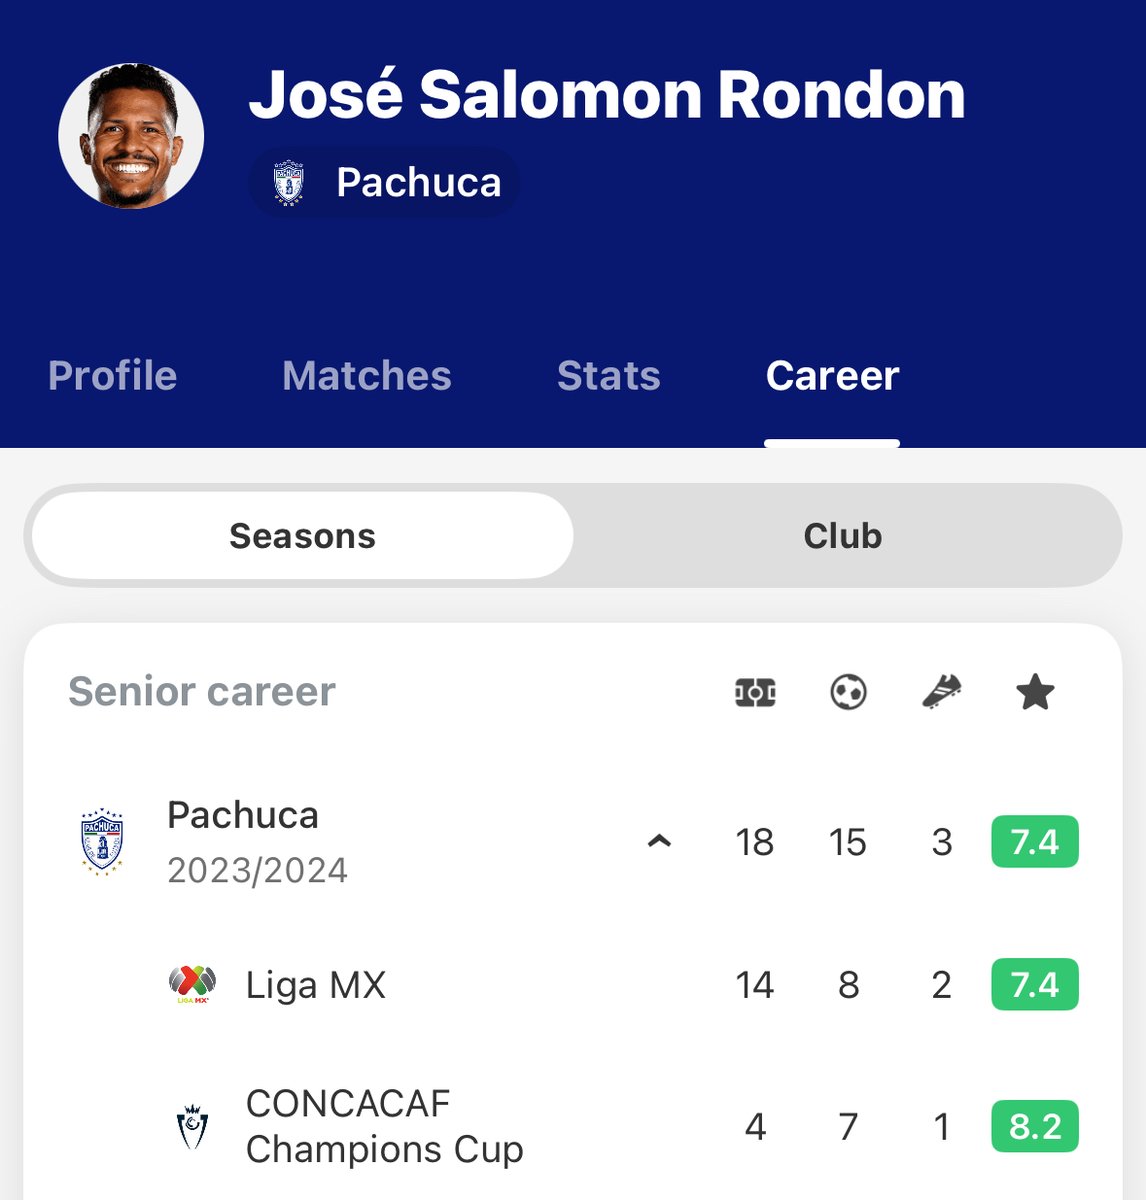 Liga MX side Pachuca won their #ConcaChampions quarter-final tie 7-1 on aggregate. Salomón Rondón scored four across the two legs taking his tally for the season to 15 goals in just 18 games. The old warhorse is loving life in his first season in Mexico!